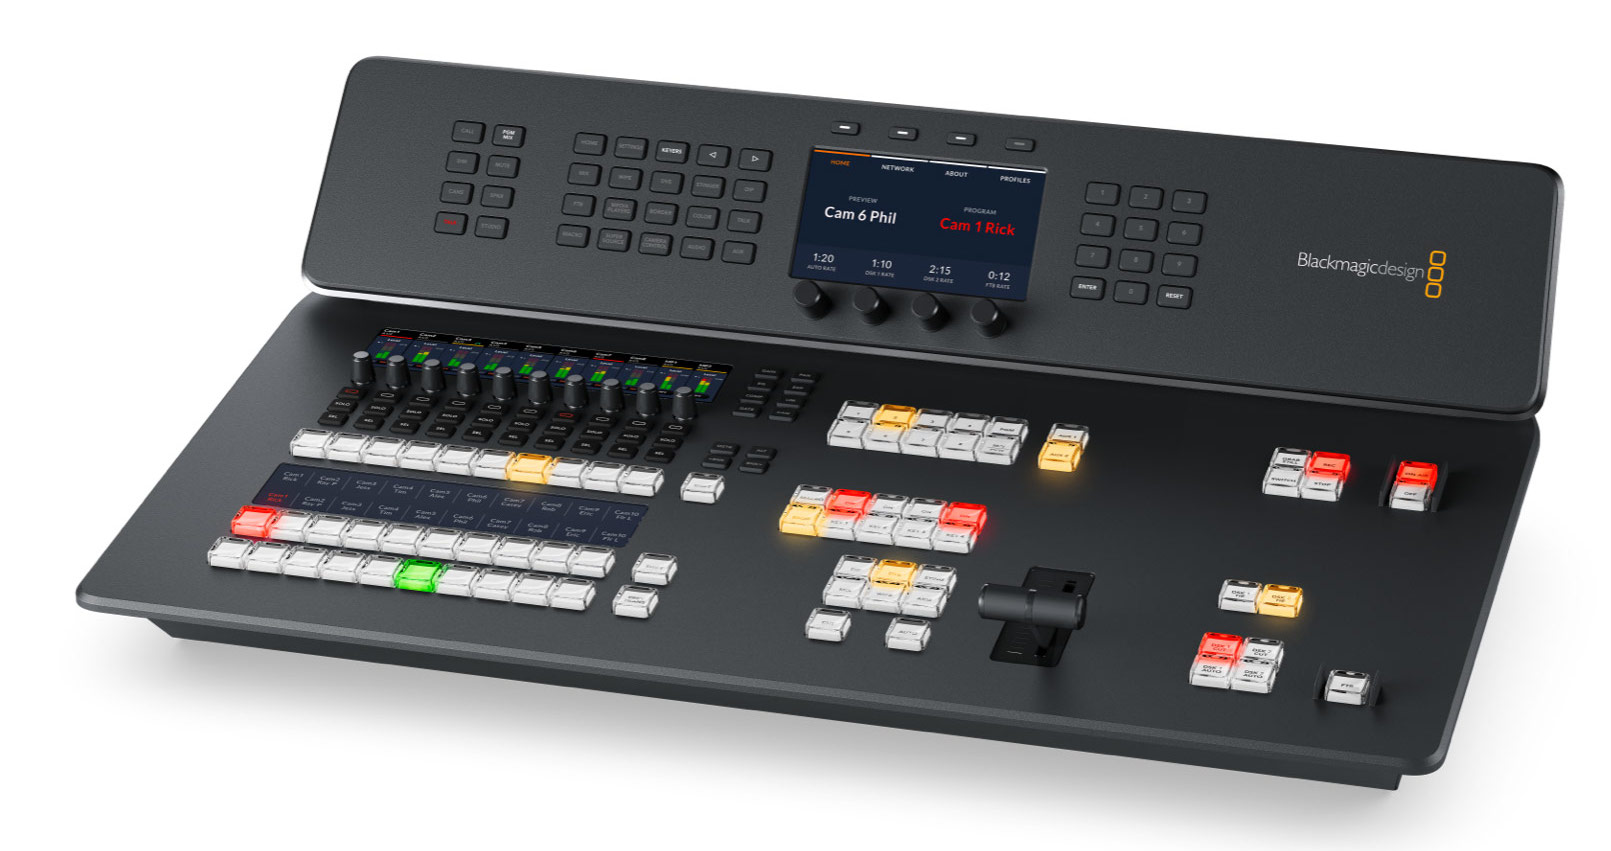 Blackmagic ATEM Television Studio HD8: New all-in-one live production mixer